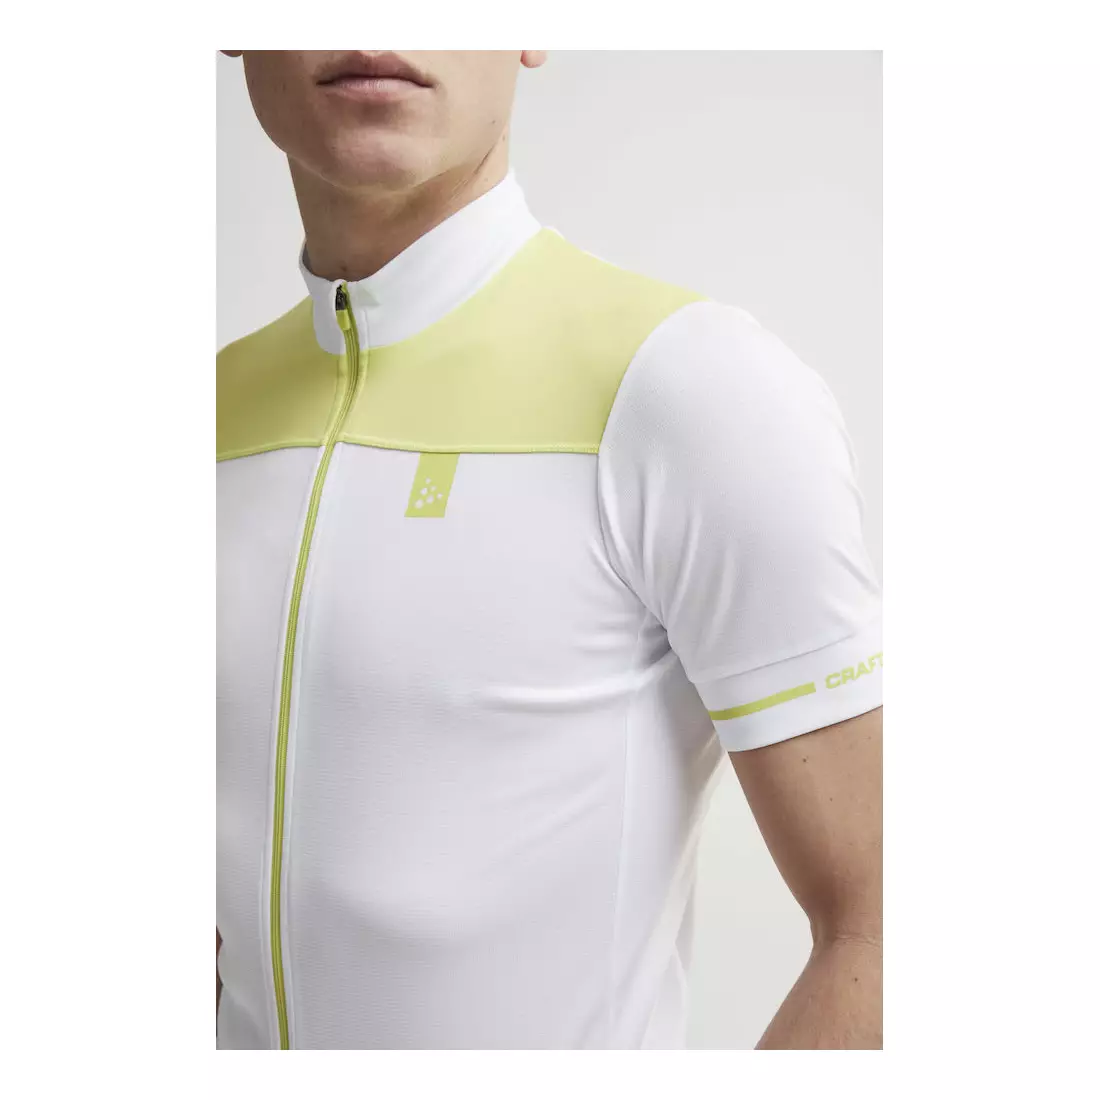 CRAFT POINT men's cycling jersey, white and green, 1906098-900611